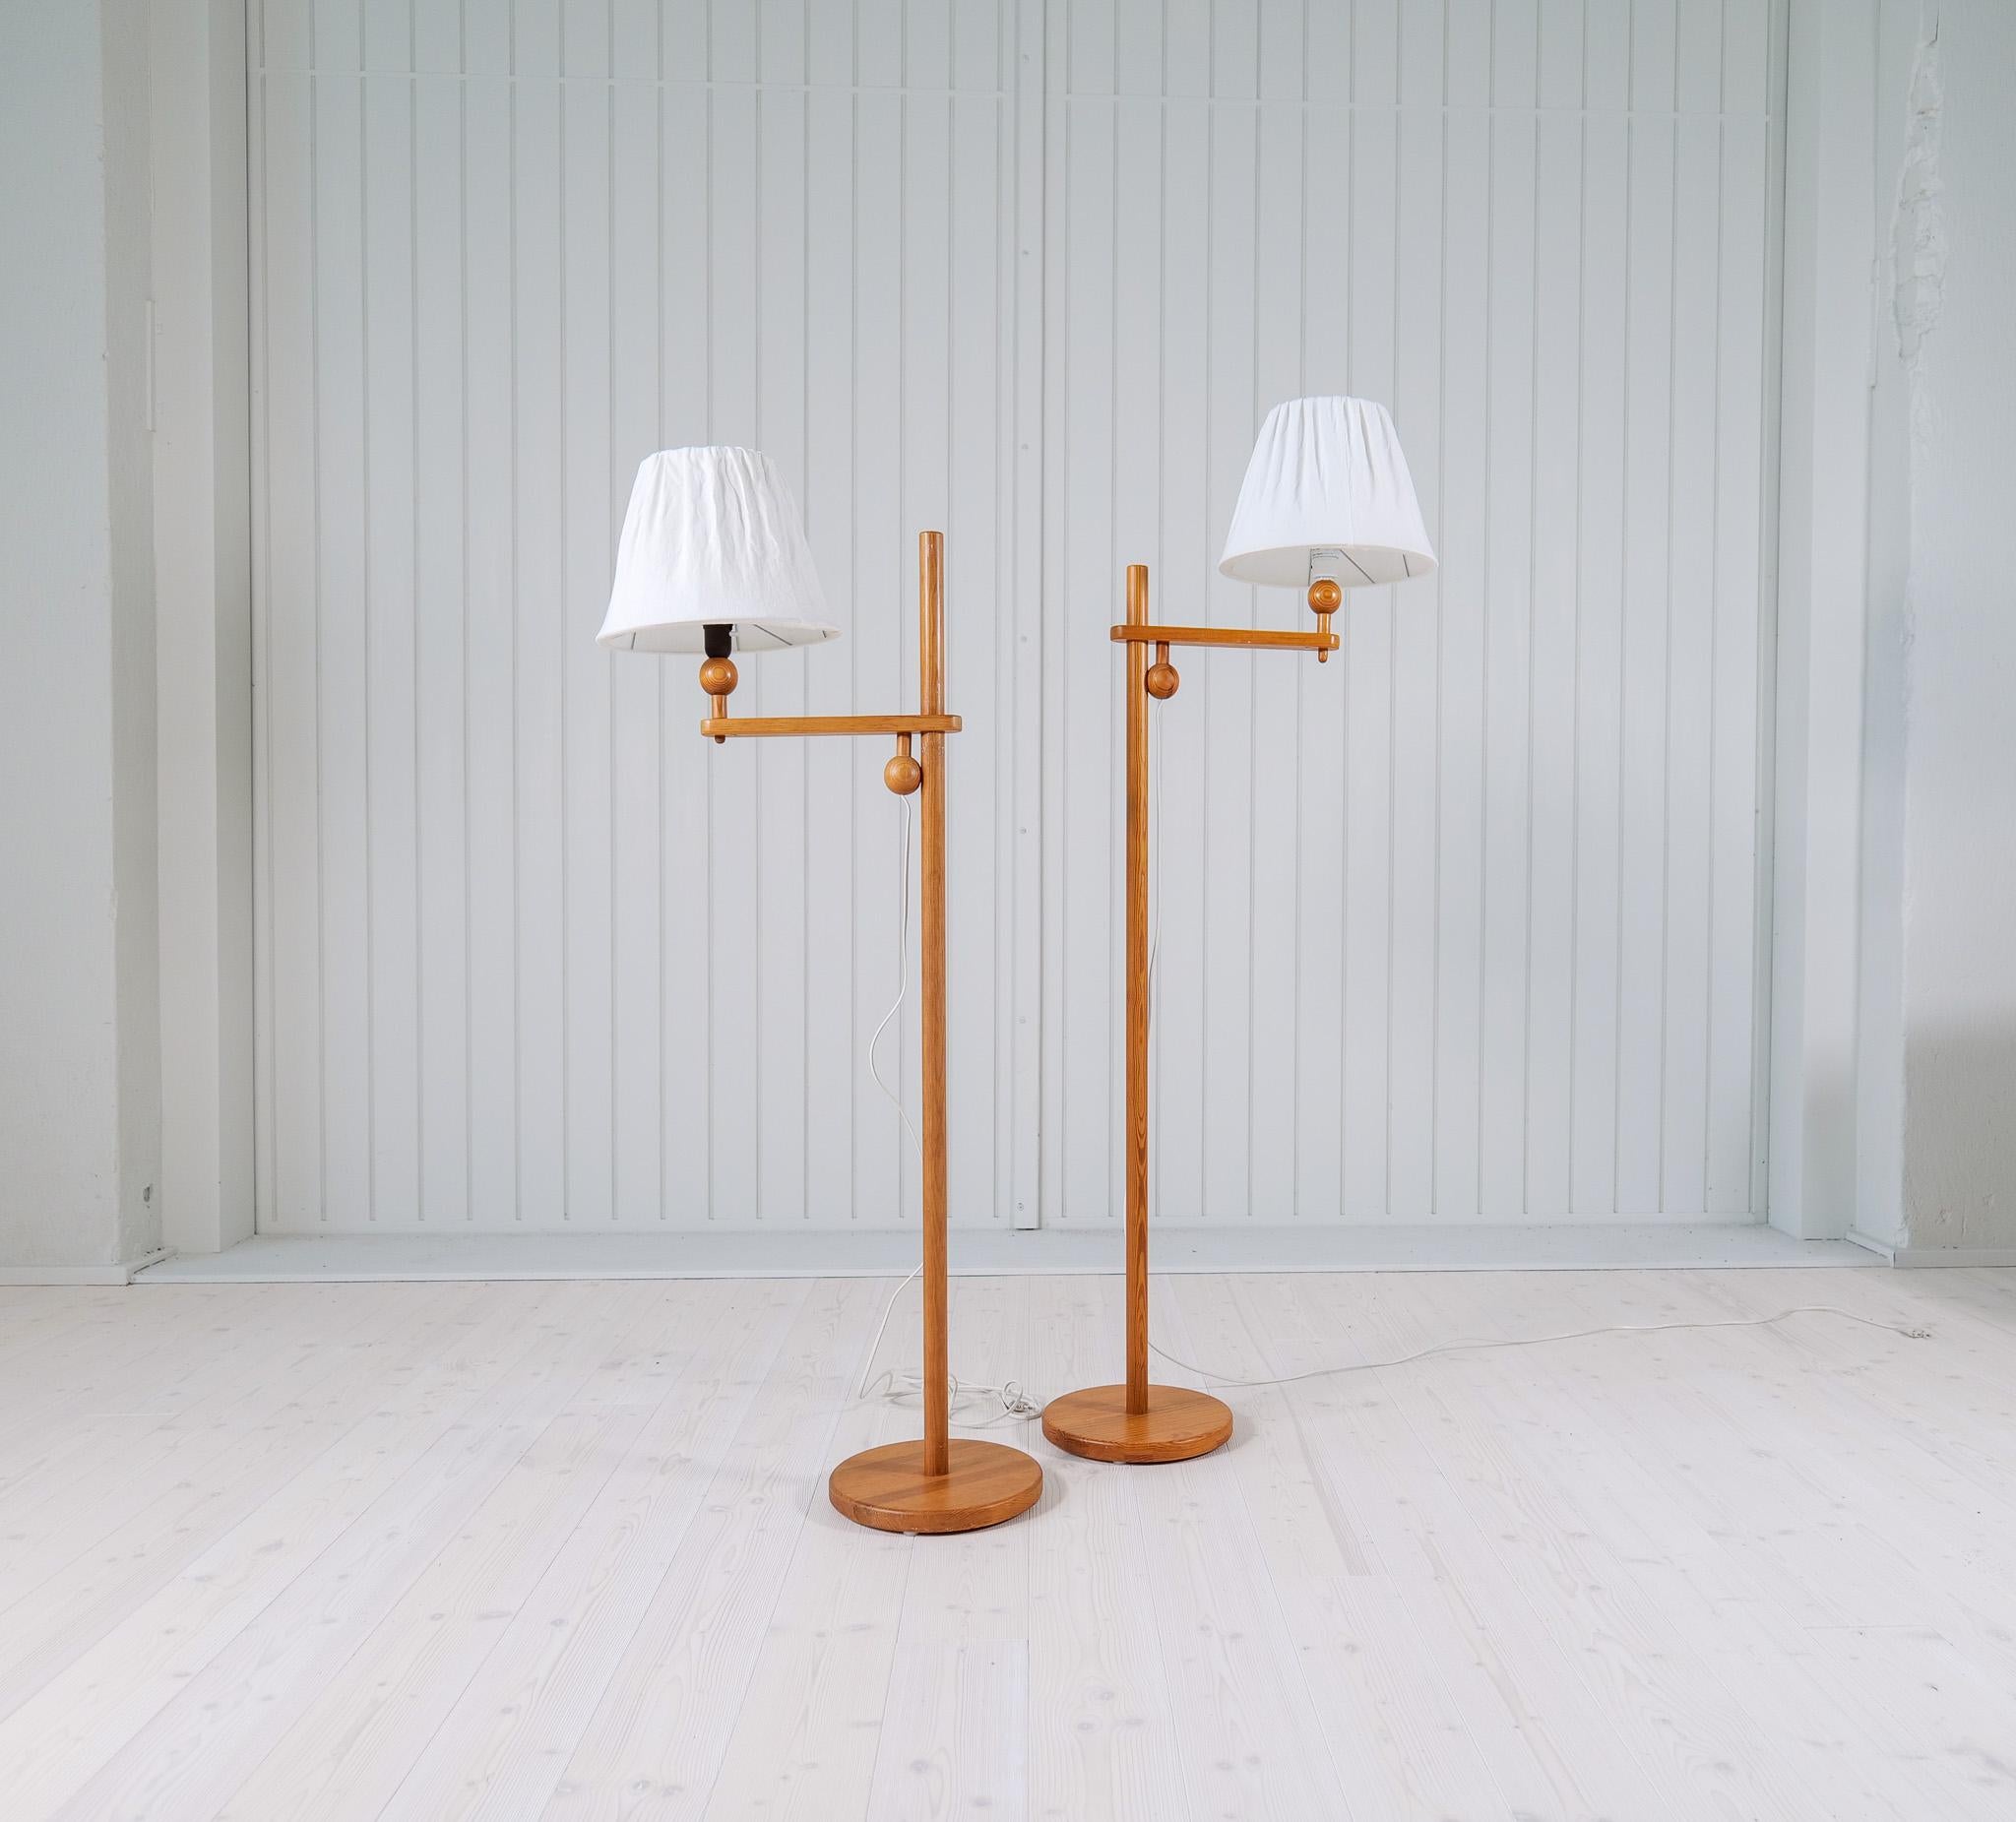 Floor lamps manufactured in Sweden. It’s made in solid pine. These ones with organically sculptured pine that gives a wonderful floor lamp. 

Nice vintage condition, small marks, and wear original shades with some wear.

Dimensions: Height 140cm,